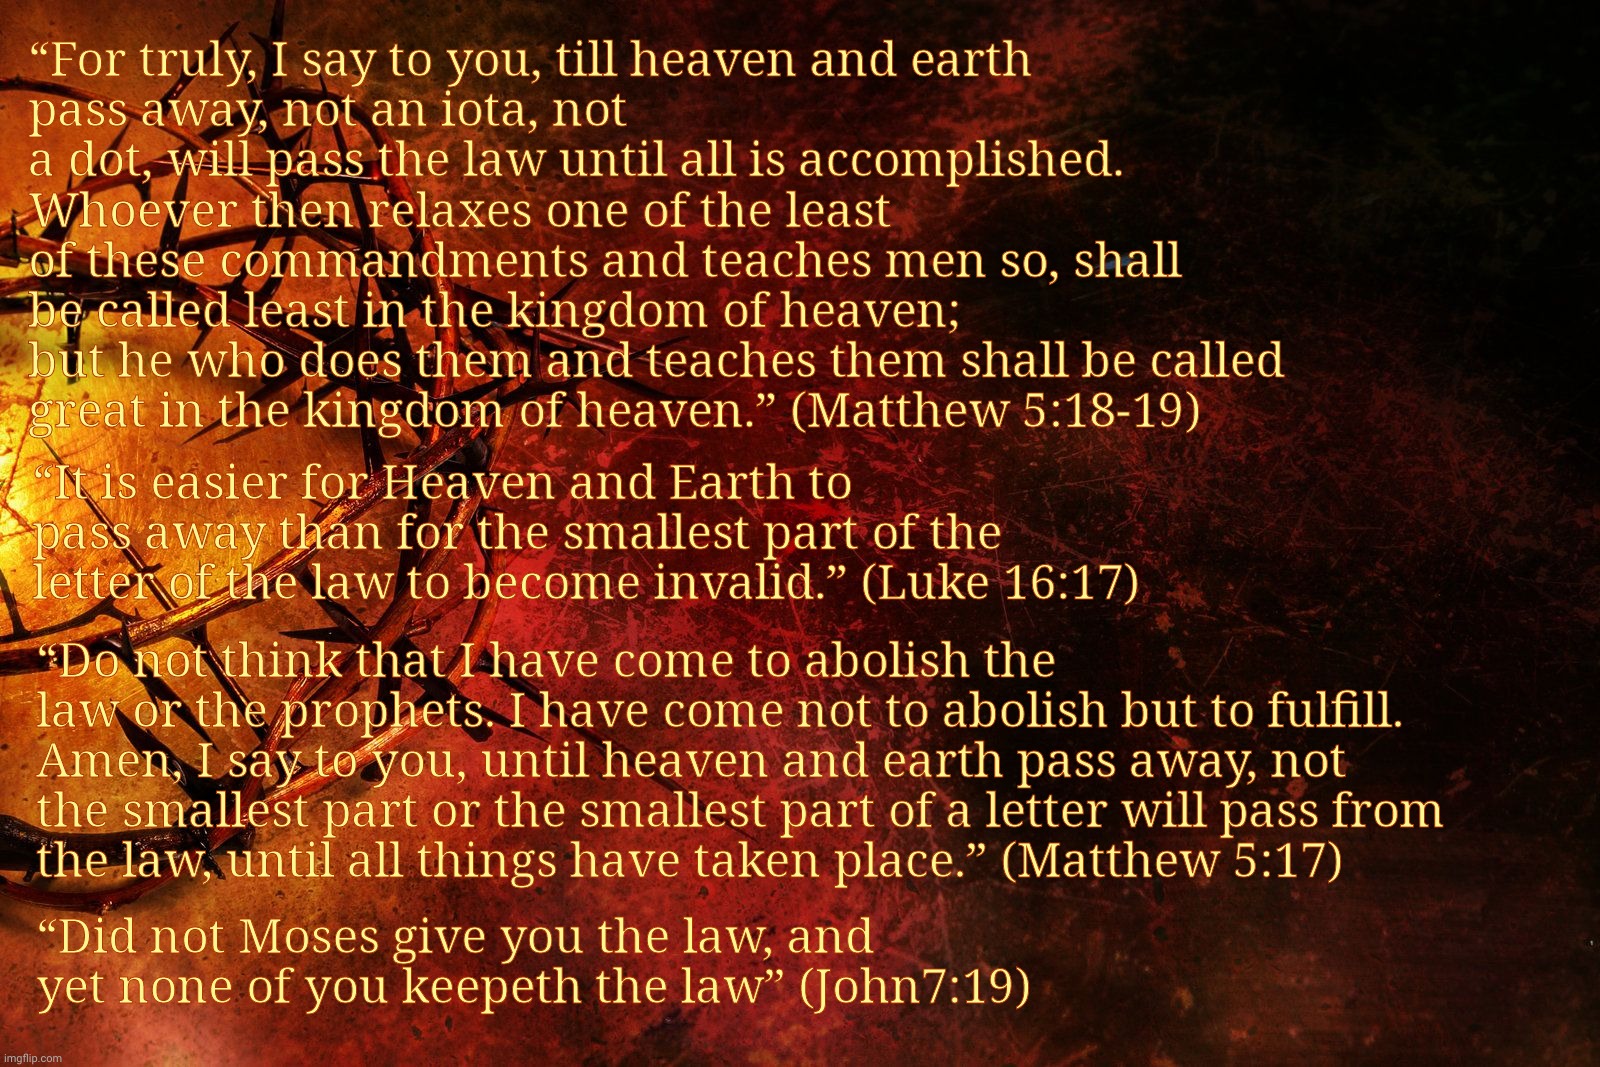 J | “For truly, I say to you, till heaven and earth
pass away, not an iota, not a dot, will pass the law until all is accomplished. Whoever then relaxes one of the least of these commandments and teaches men so, shall be called least in the kingdom of heaven;
but he who does them and teaches them shall be called
great in the kingdom of heaven.” (Matthew 5:18-19); “It is easier for Heaven and Earth to pass away than for the smallest part of the letter of the law to become invalid.” (Luke 16:17); “Do not think that I have come to abolish the law or the prophets. I have come not to abolish but to fulfill. Amen, I say to you, until heaven and earth pass away, not
the smallest part or the smallest part of a letter will pass from
the law, until all things have taken place.” (Matthew 5:17); “Did not Moses give you the law, and yet none of you keepeth the law” (John7:19) | image tagged in jesus crown of thorns,jesus law | made w/ Imgflip meme maker